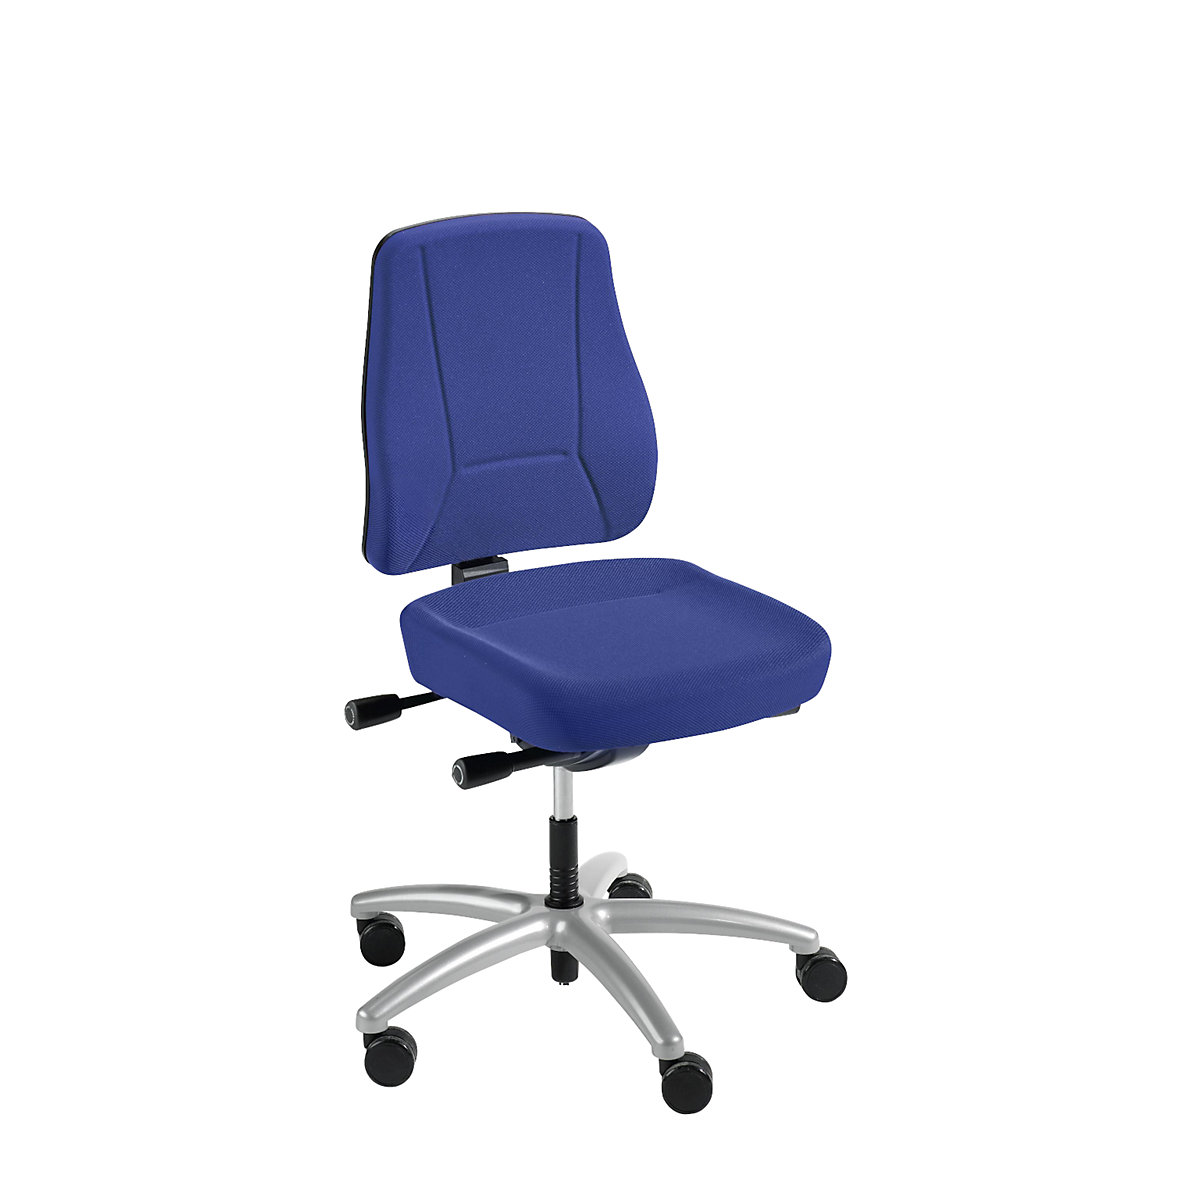 YOUNICO PRO office swivel chair – Prosedia, back rest height 540 mm, royal blue-4